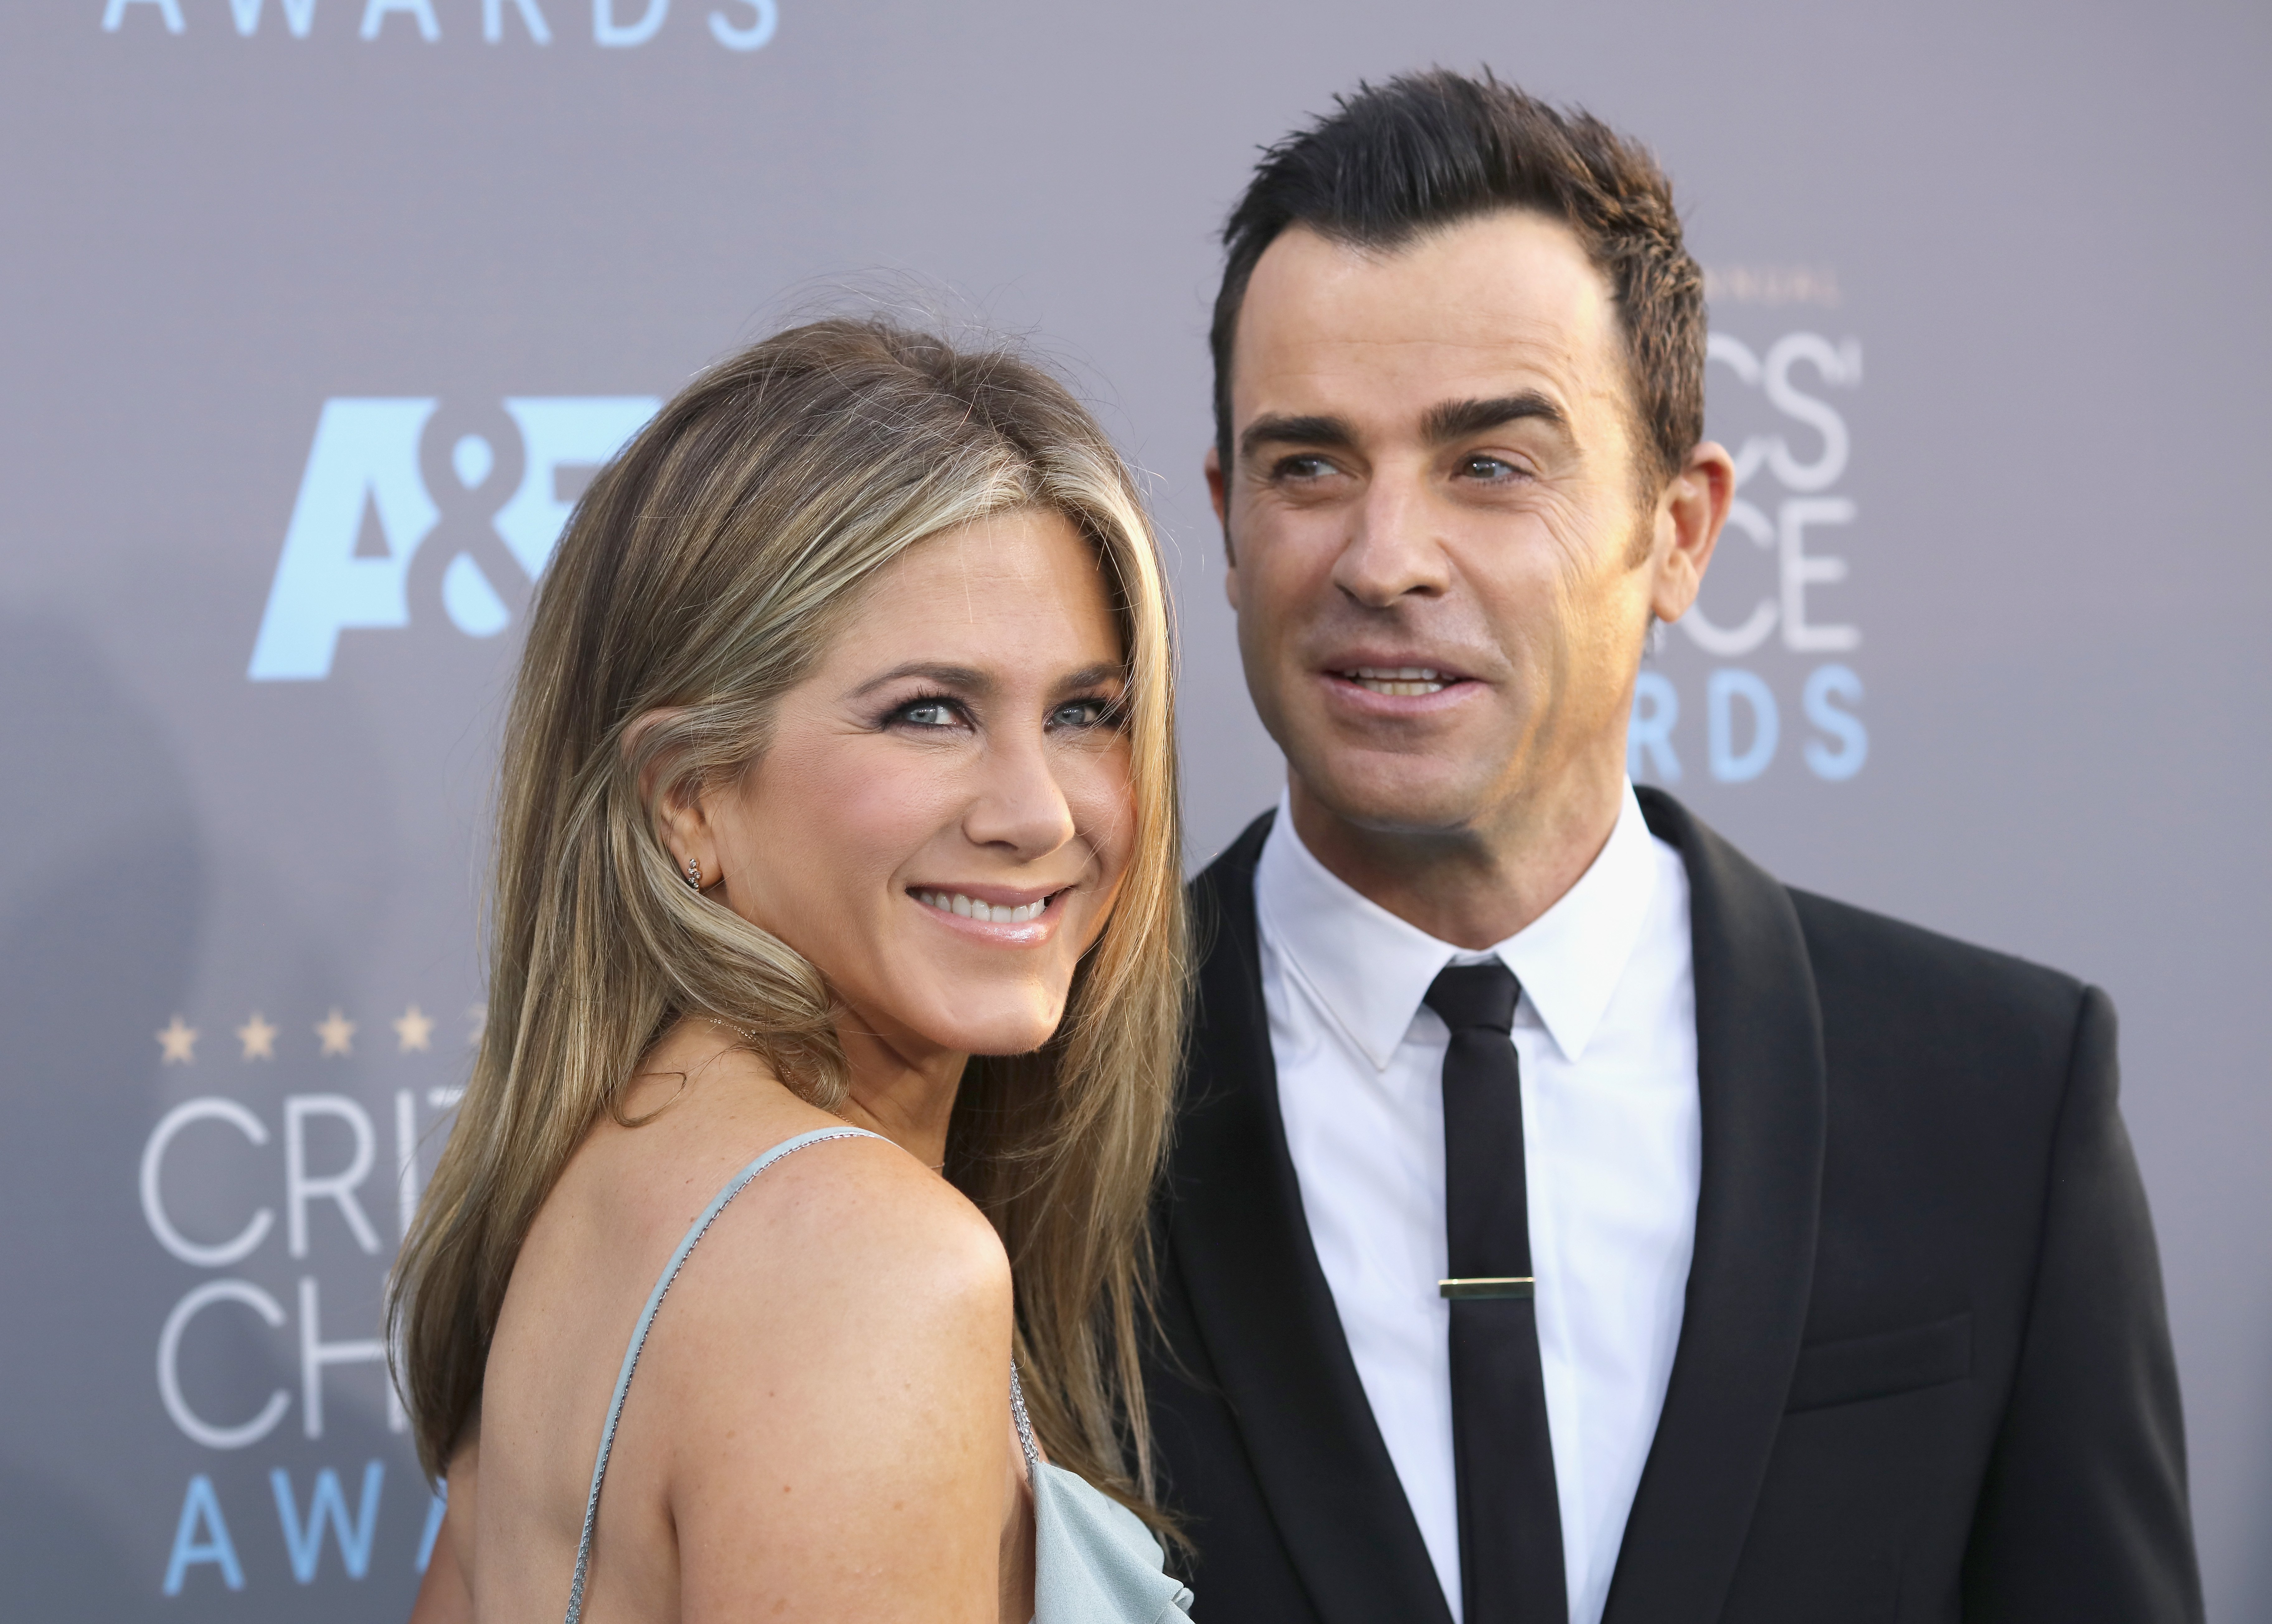 Jennifer Aniston (L) and Justin Theroux attend the 21st Annual Critics' Choice Awards at Barker Hangar on January 17, 2016, in Santa Monica, California. | Source: Getty Images.